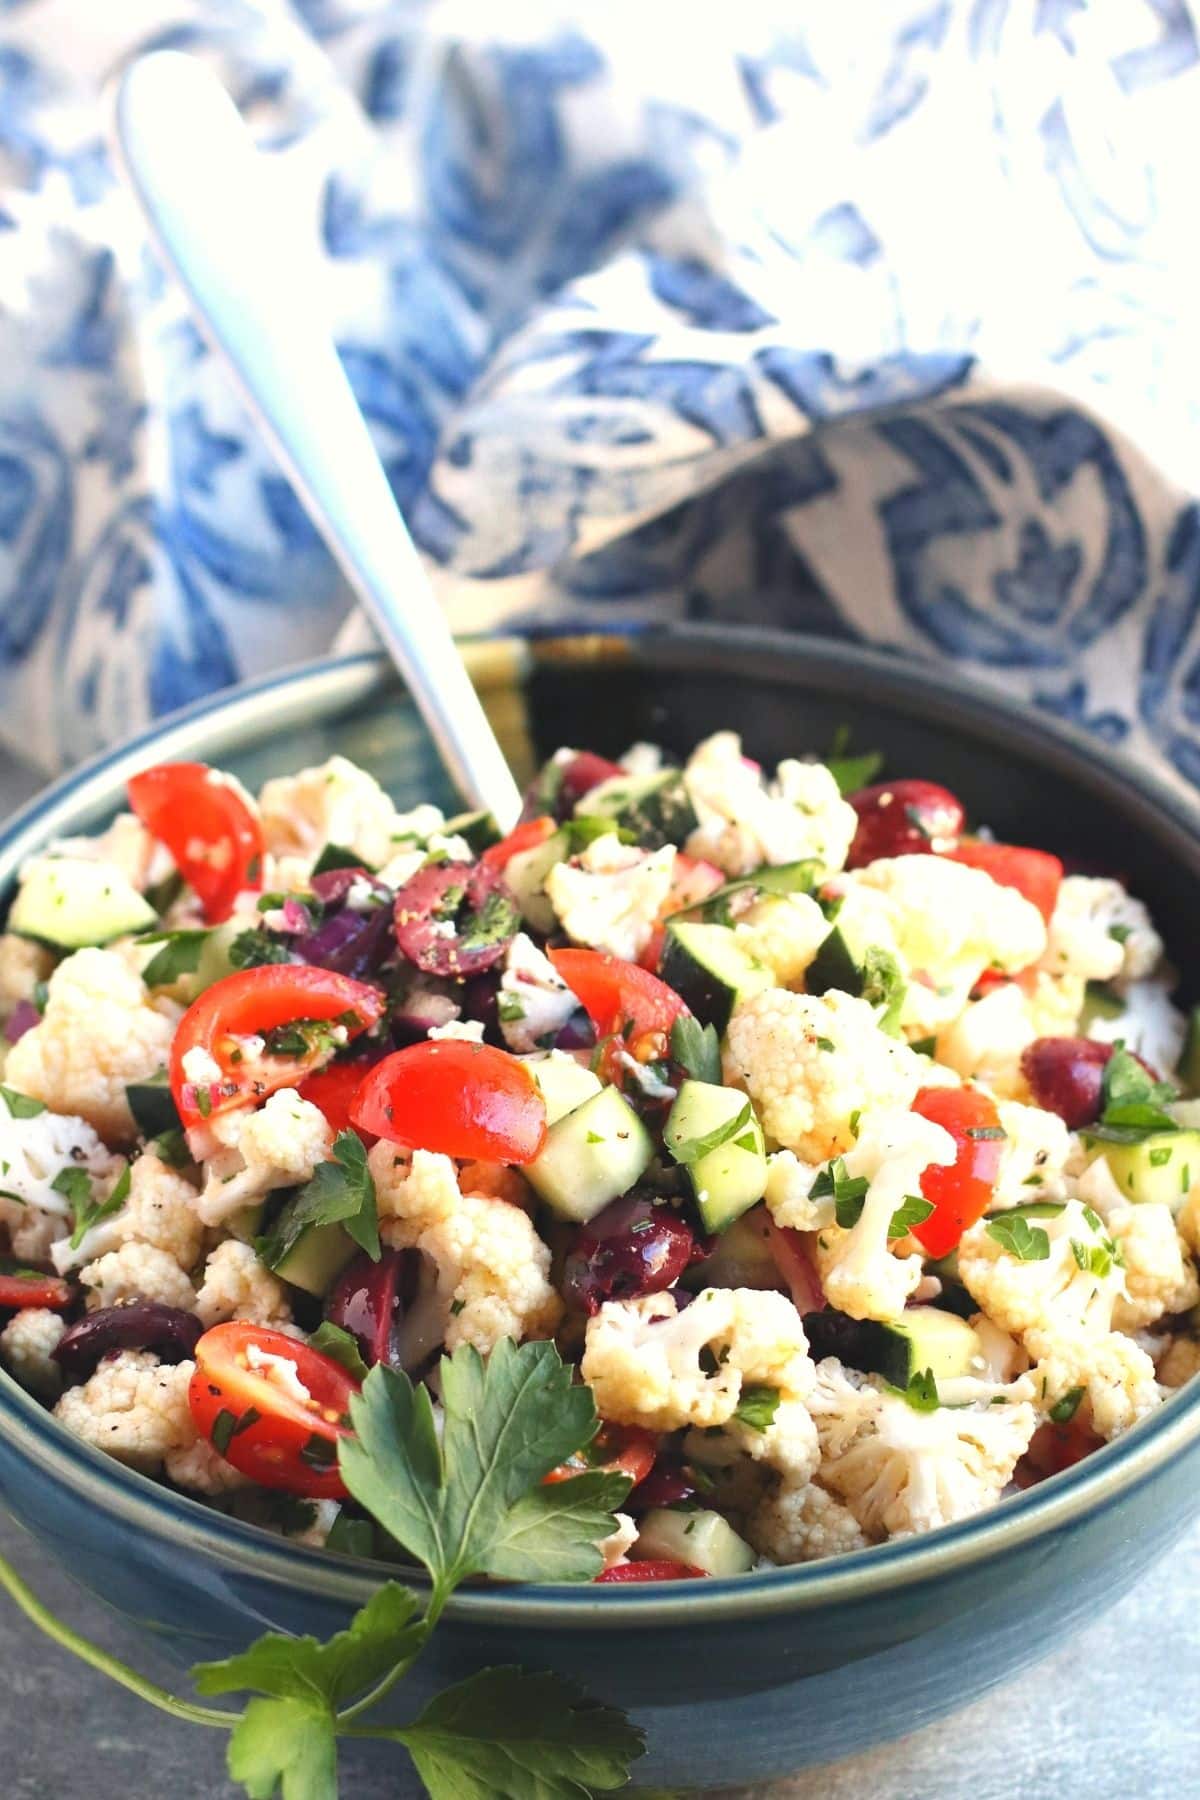 Bowl of cauliflower salad with olives and tomatoes